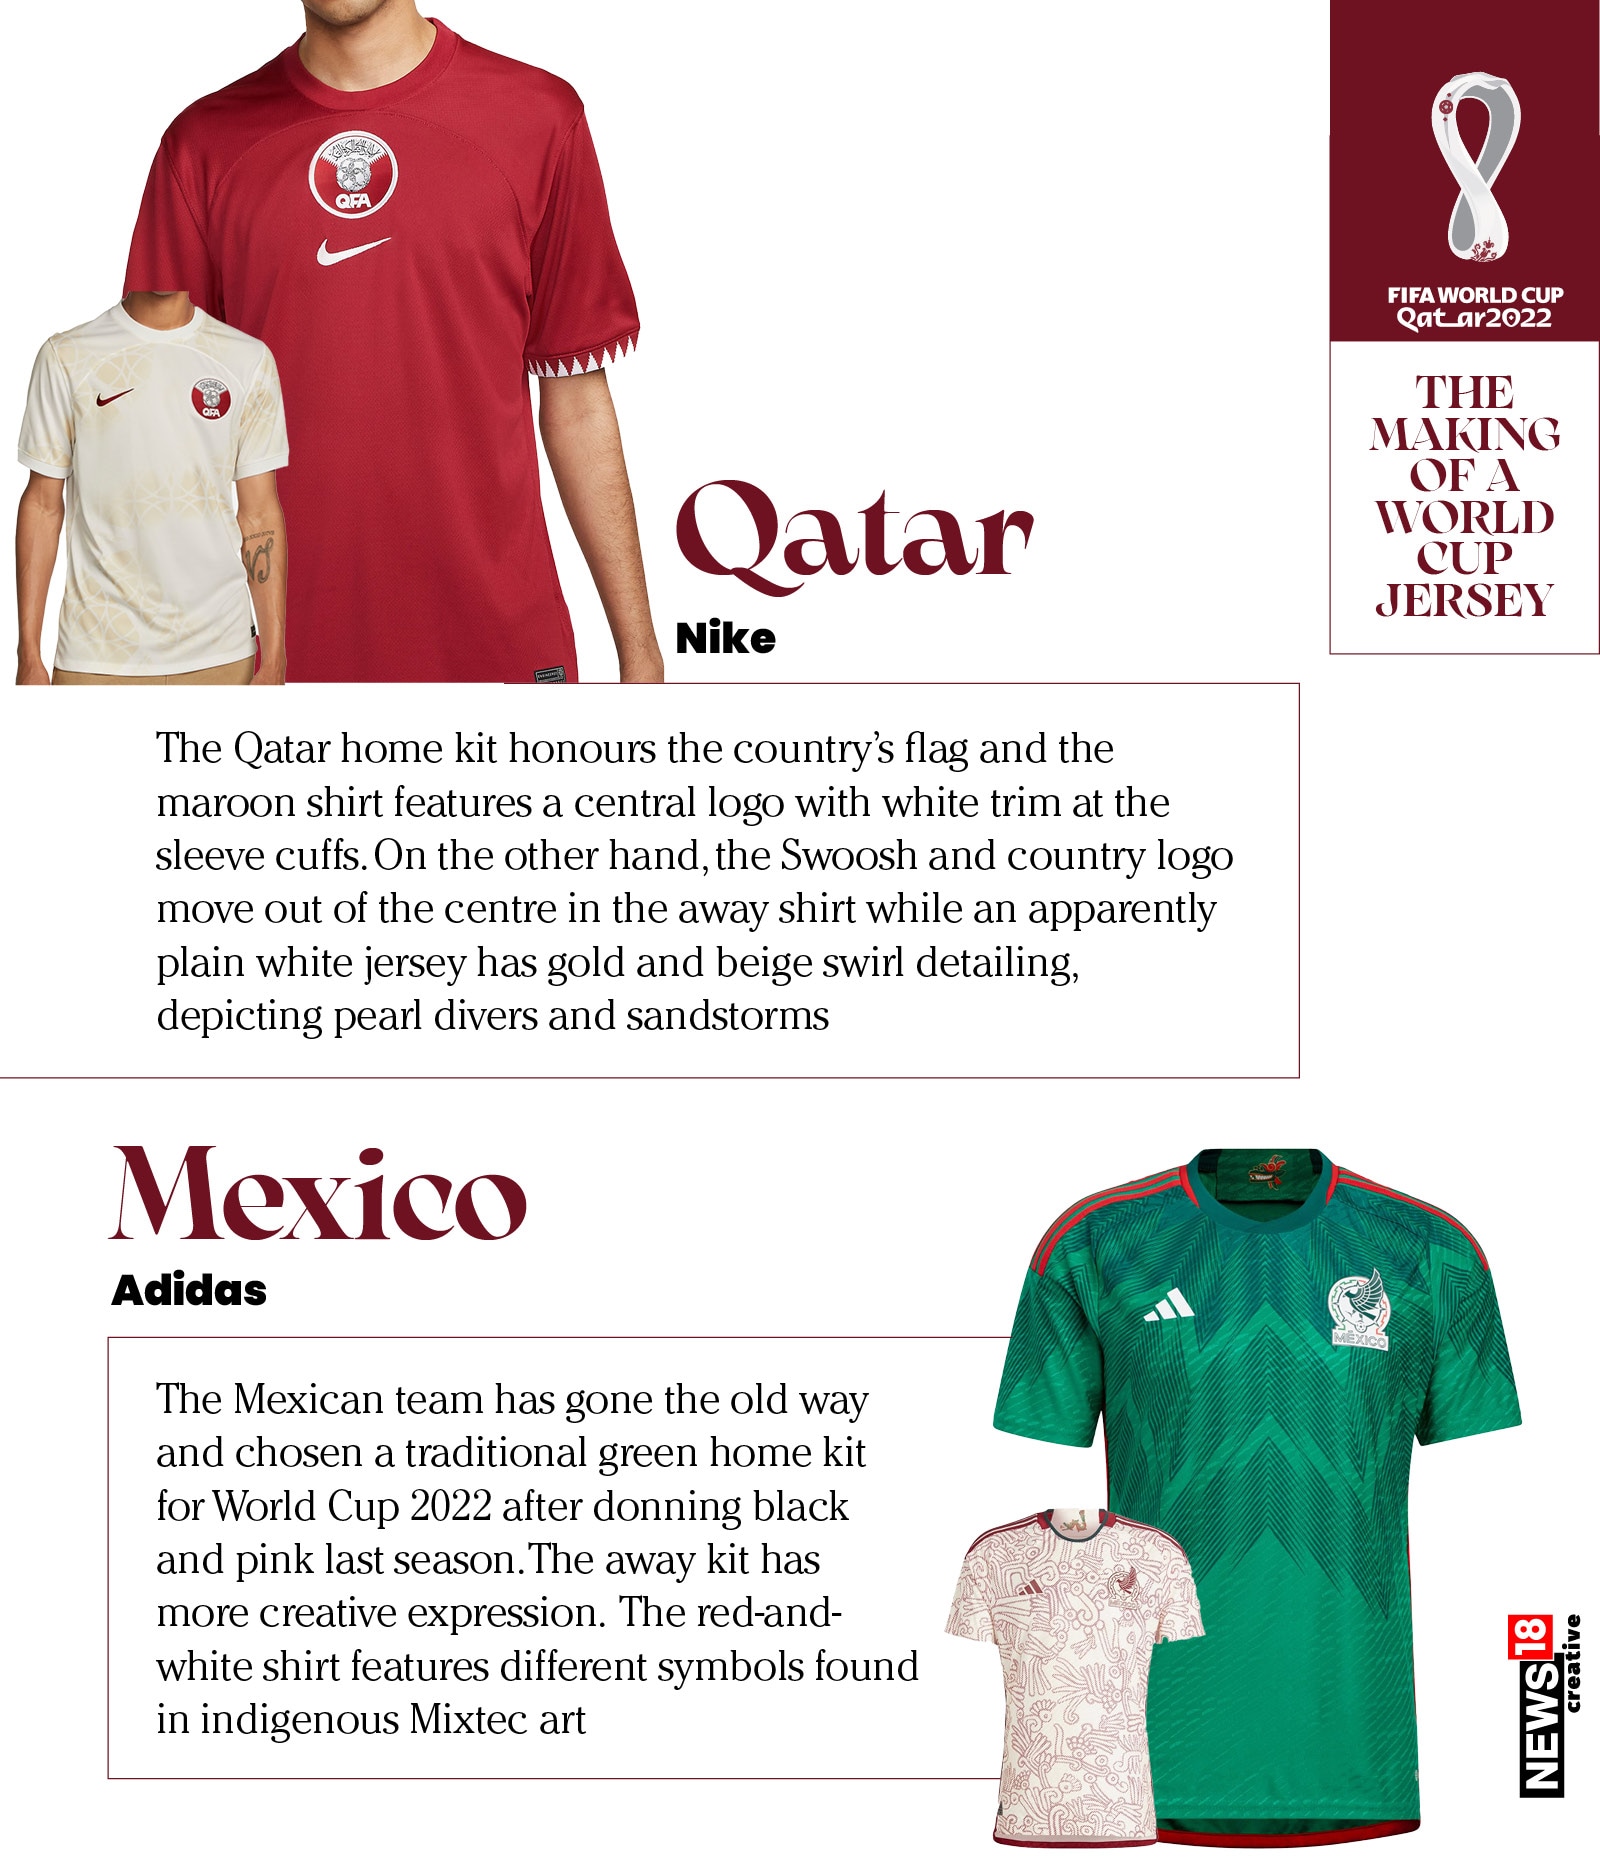 THE MAKING OF A WORLD CUP JERSEY: Qatar and Mexico